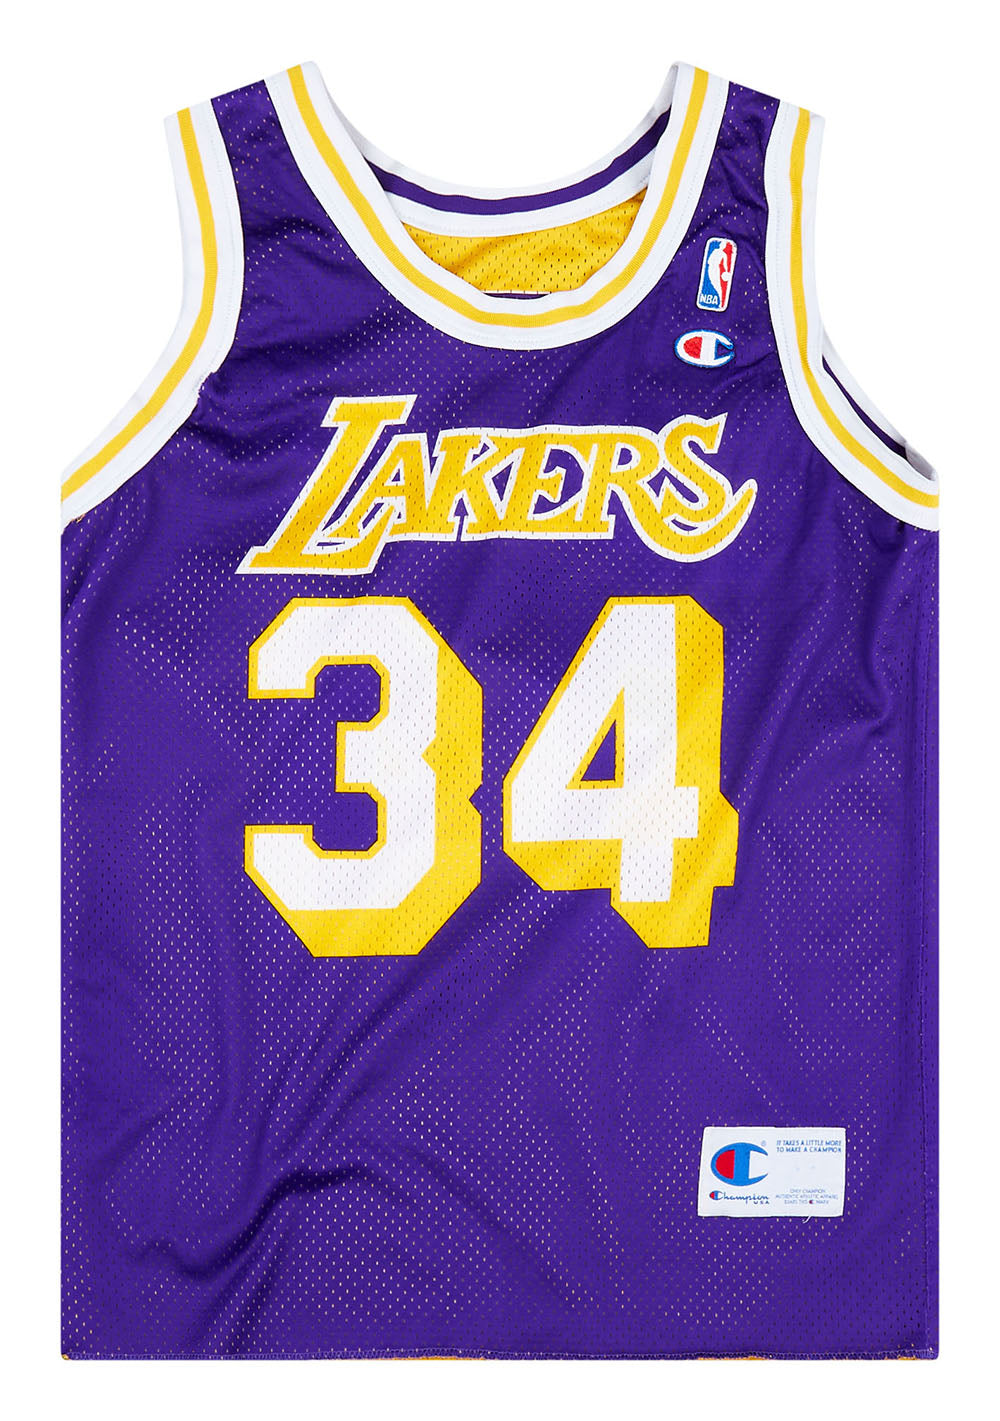 Vintage NBA Shaquille O'neal Purple Champion Lakers Jersey Number